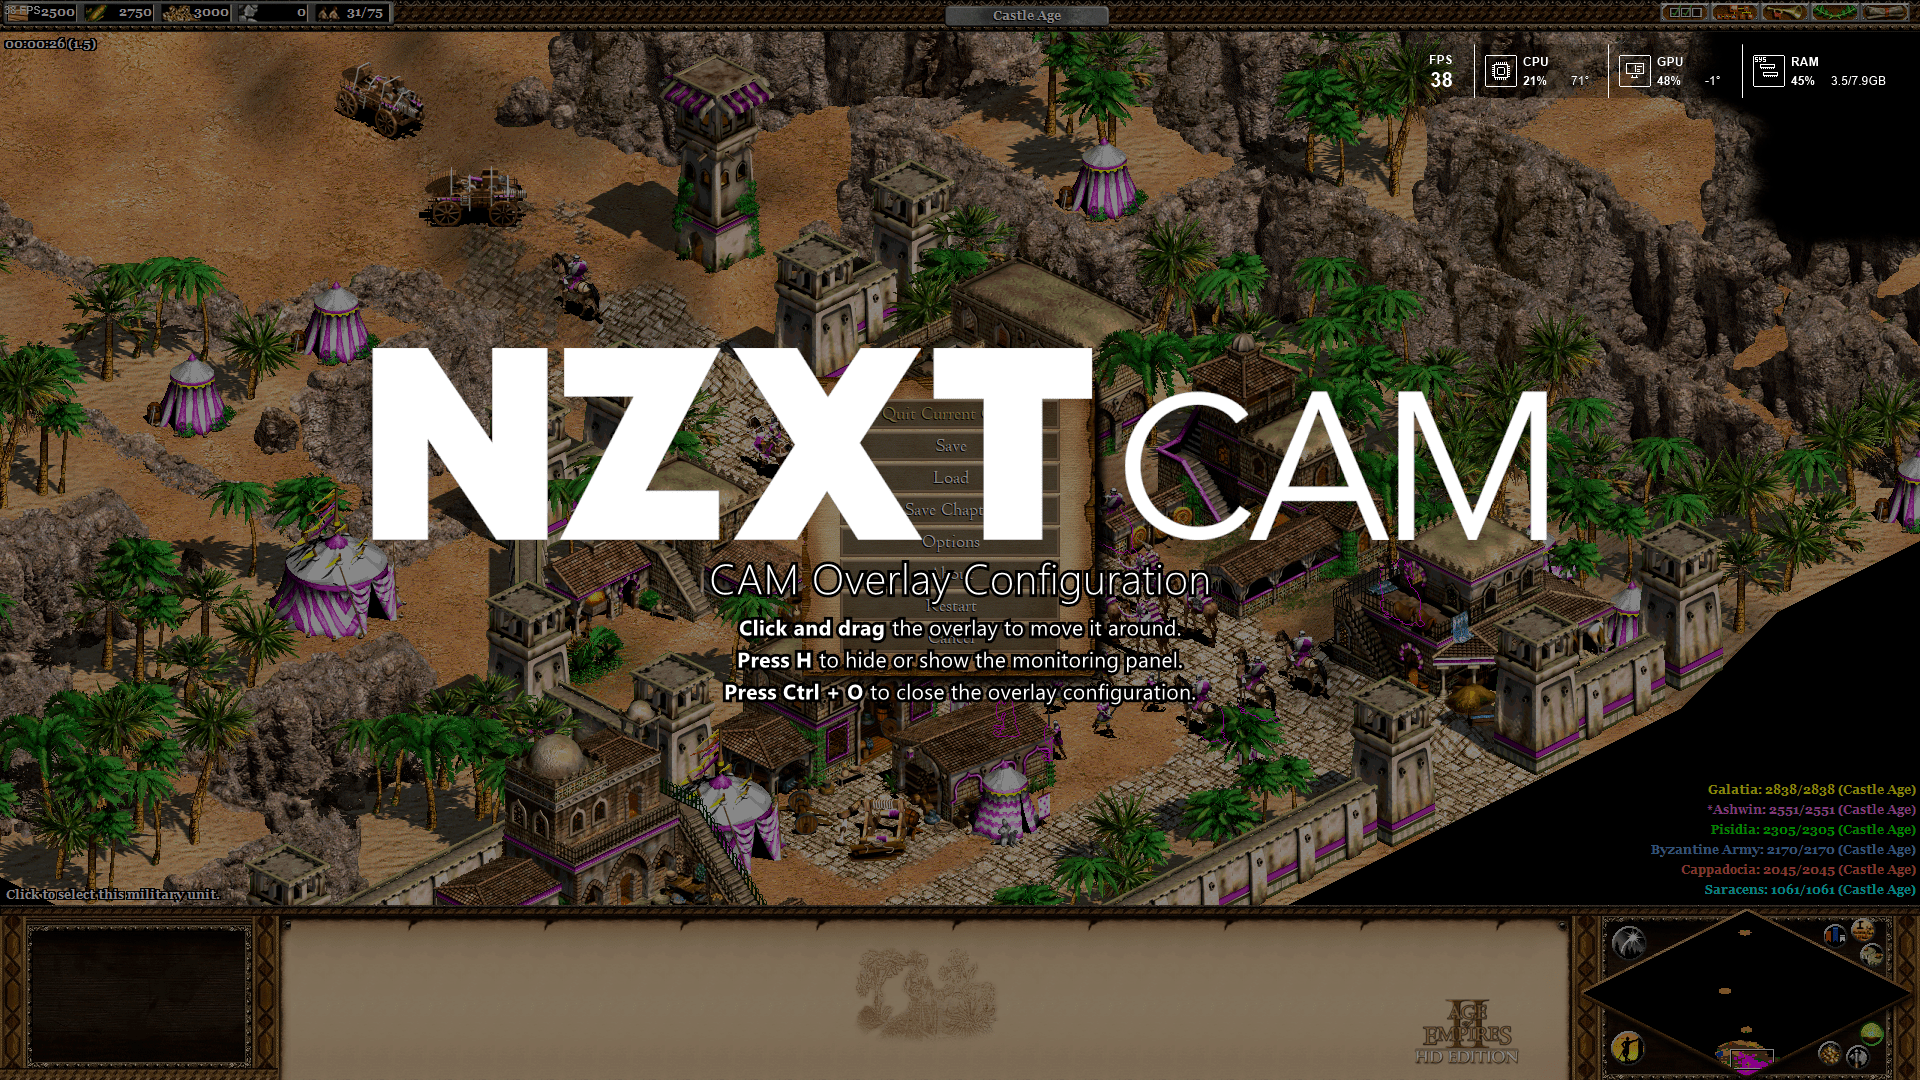 NZXT Cam overlay reposition